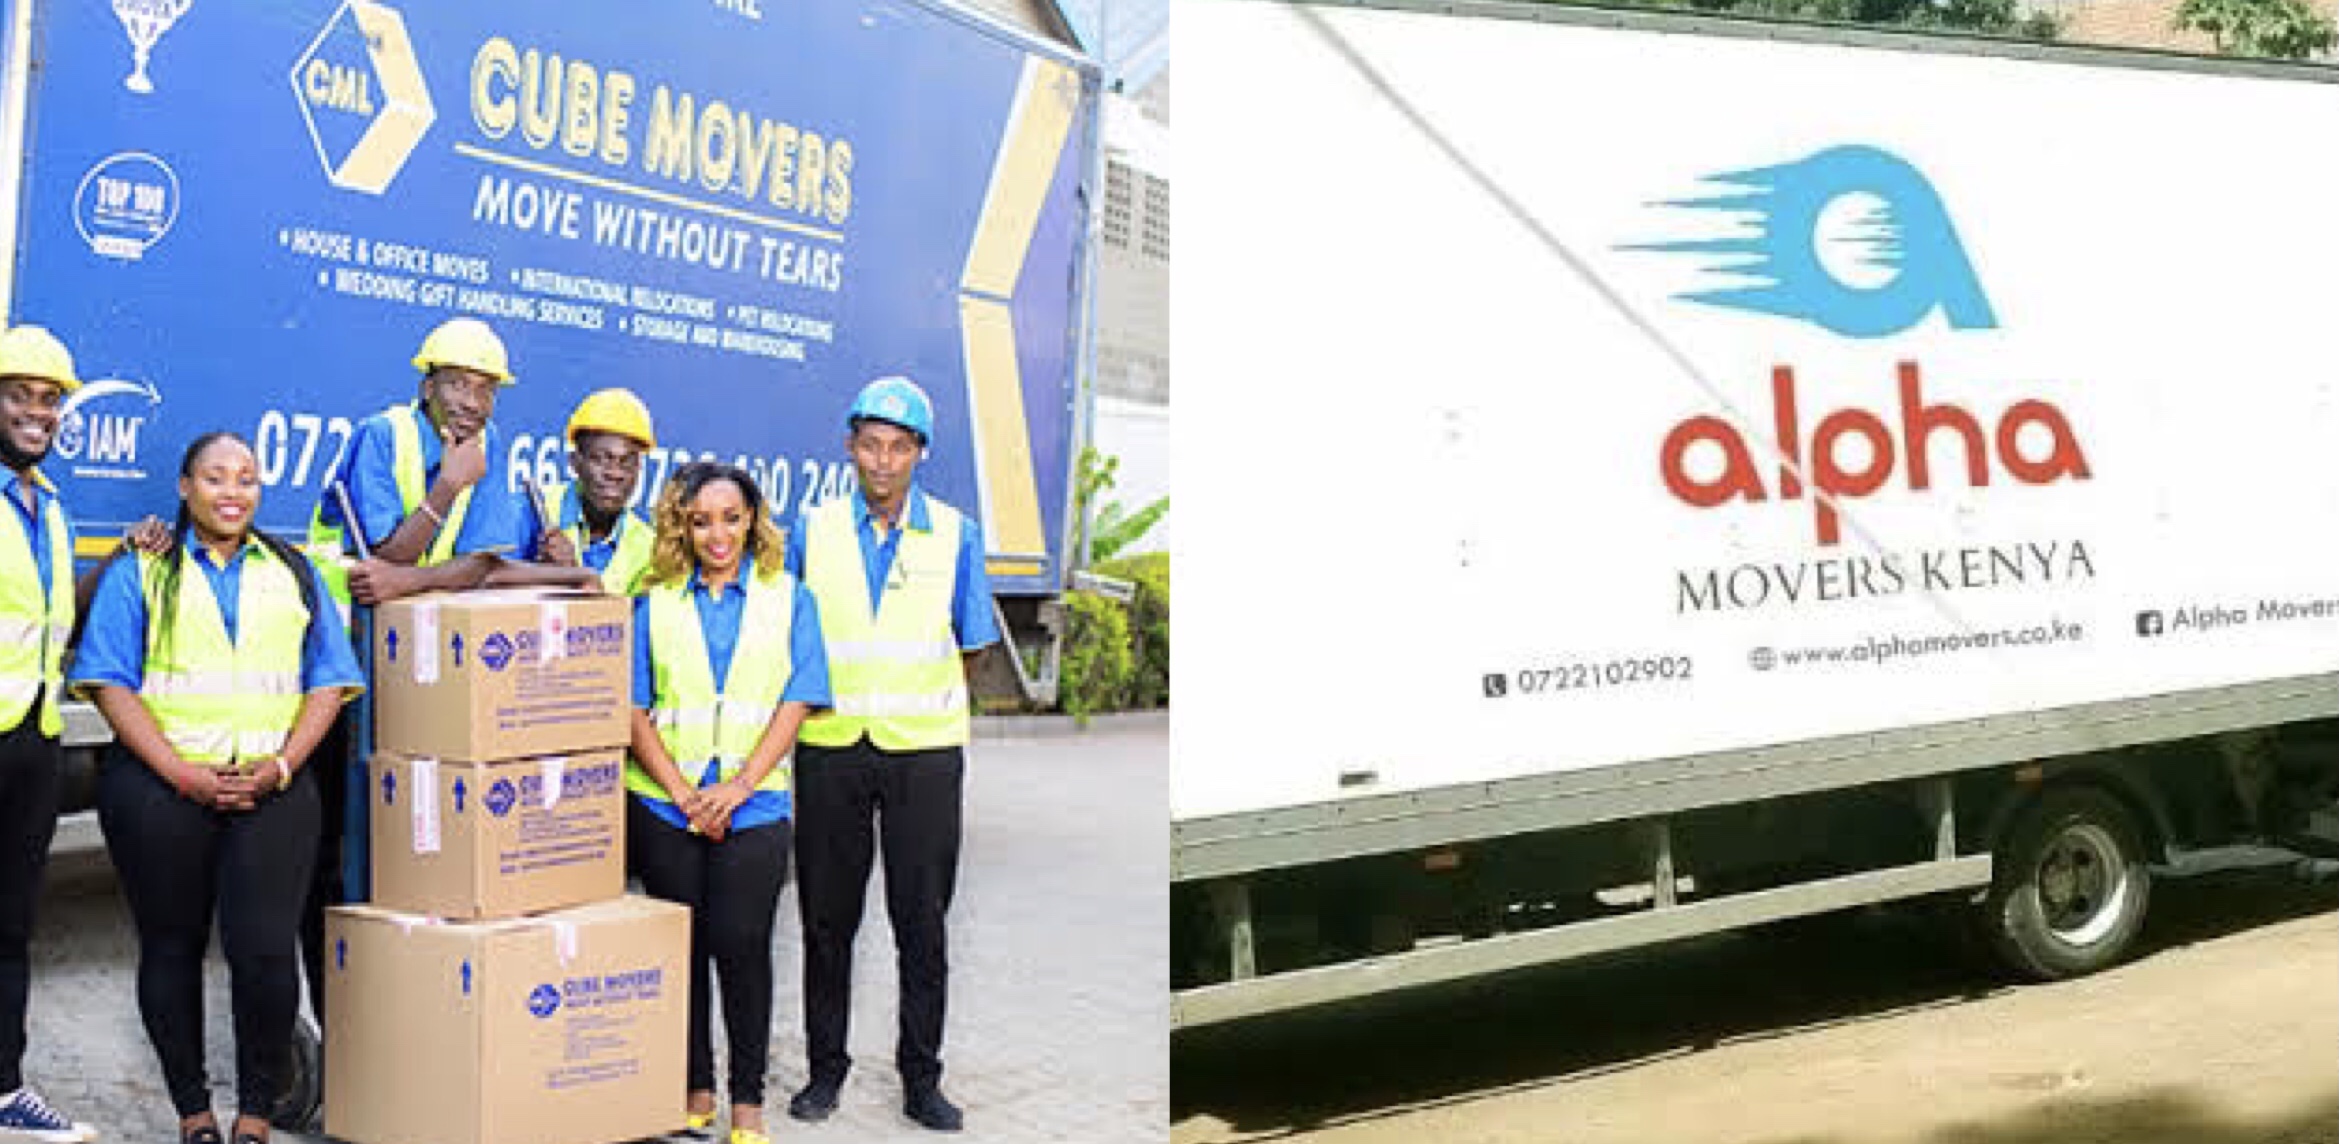 Cube Movers and Alpha Movers Kenya /Courtesy